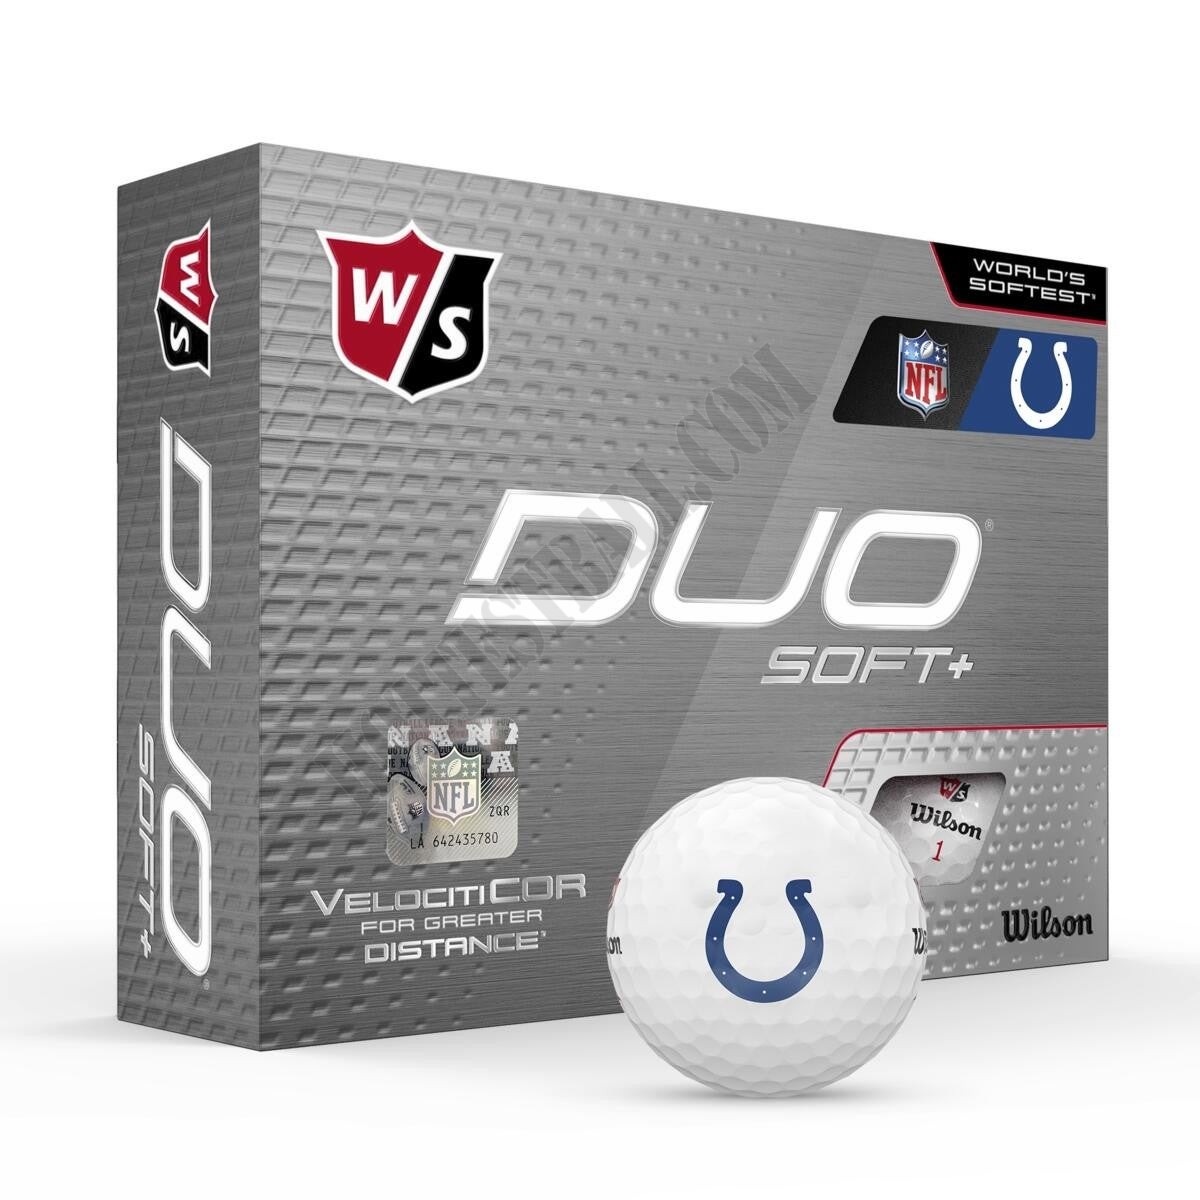 Duo Soft+ NFL Golf Balls - Indianapolis Colts ● Wilson Promotions - Duo Soft+ NFL Golf Balls - Indianapolis Colts ● Wilson Promotions